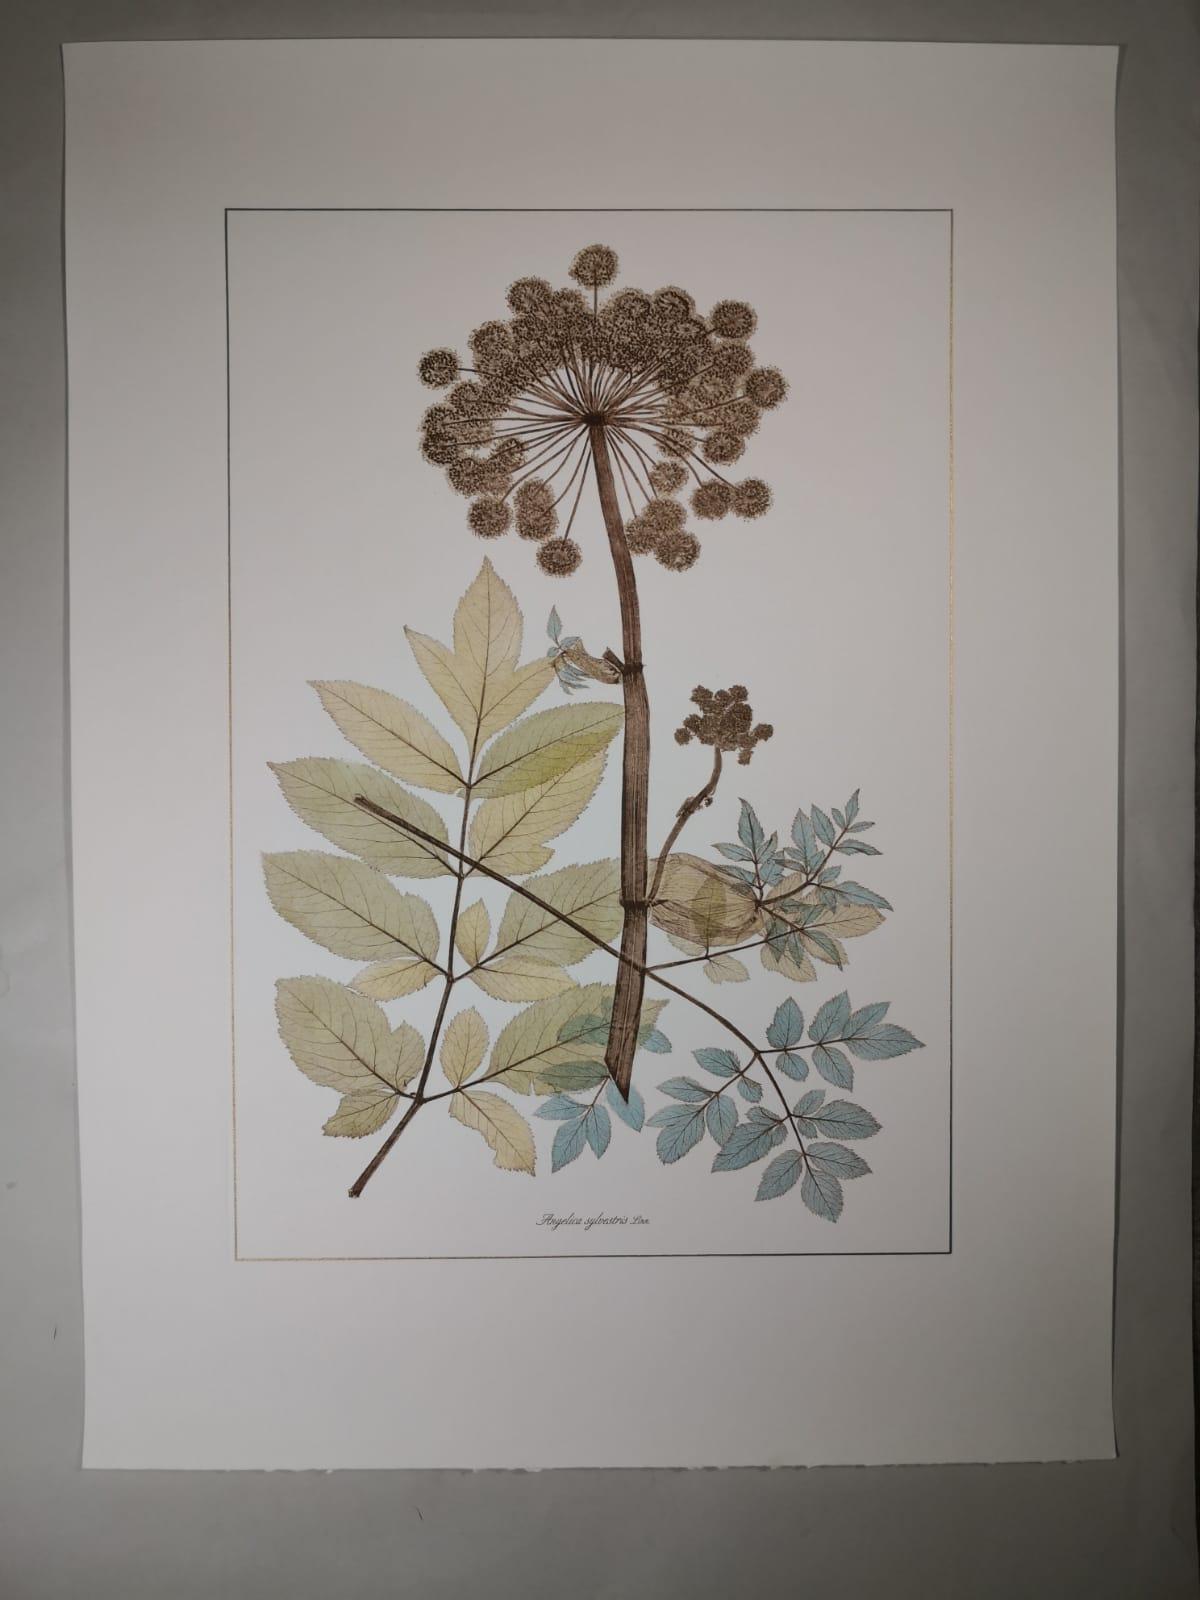 Elegant hand-watercoloured print representing the flowering and wild plant Angelica Sylvestris. 

This botanical style print is available in 4 different natural representations to create a bright and joyful composition.

With an experience of